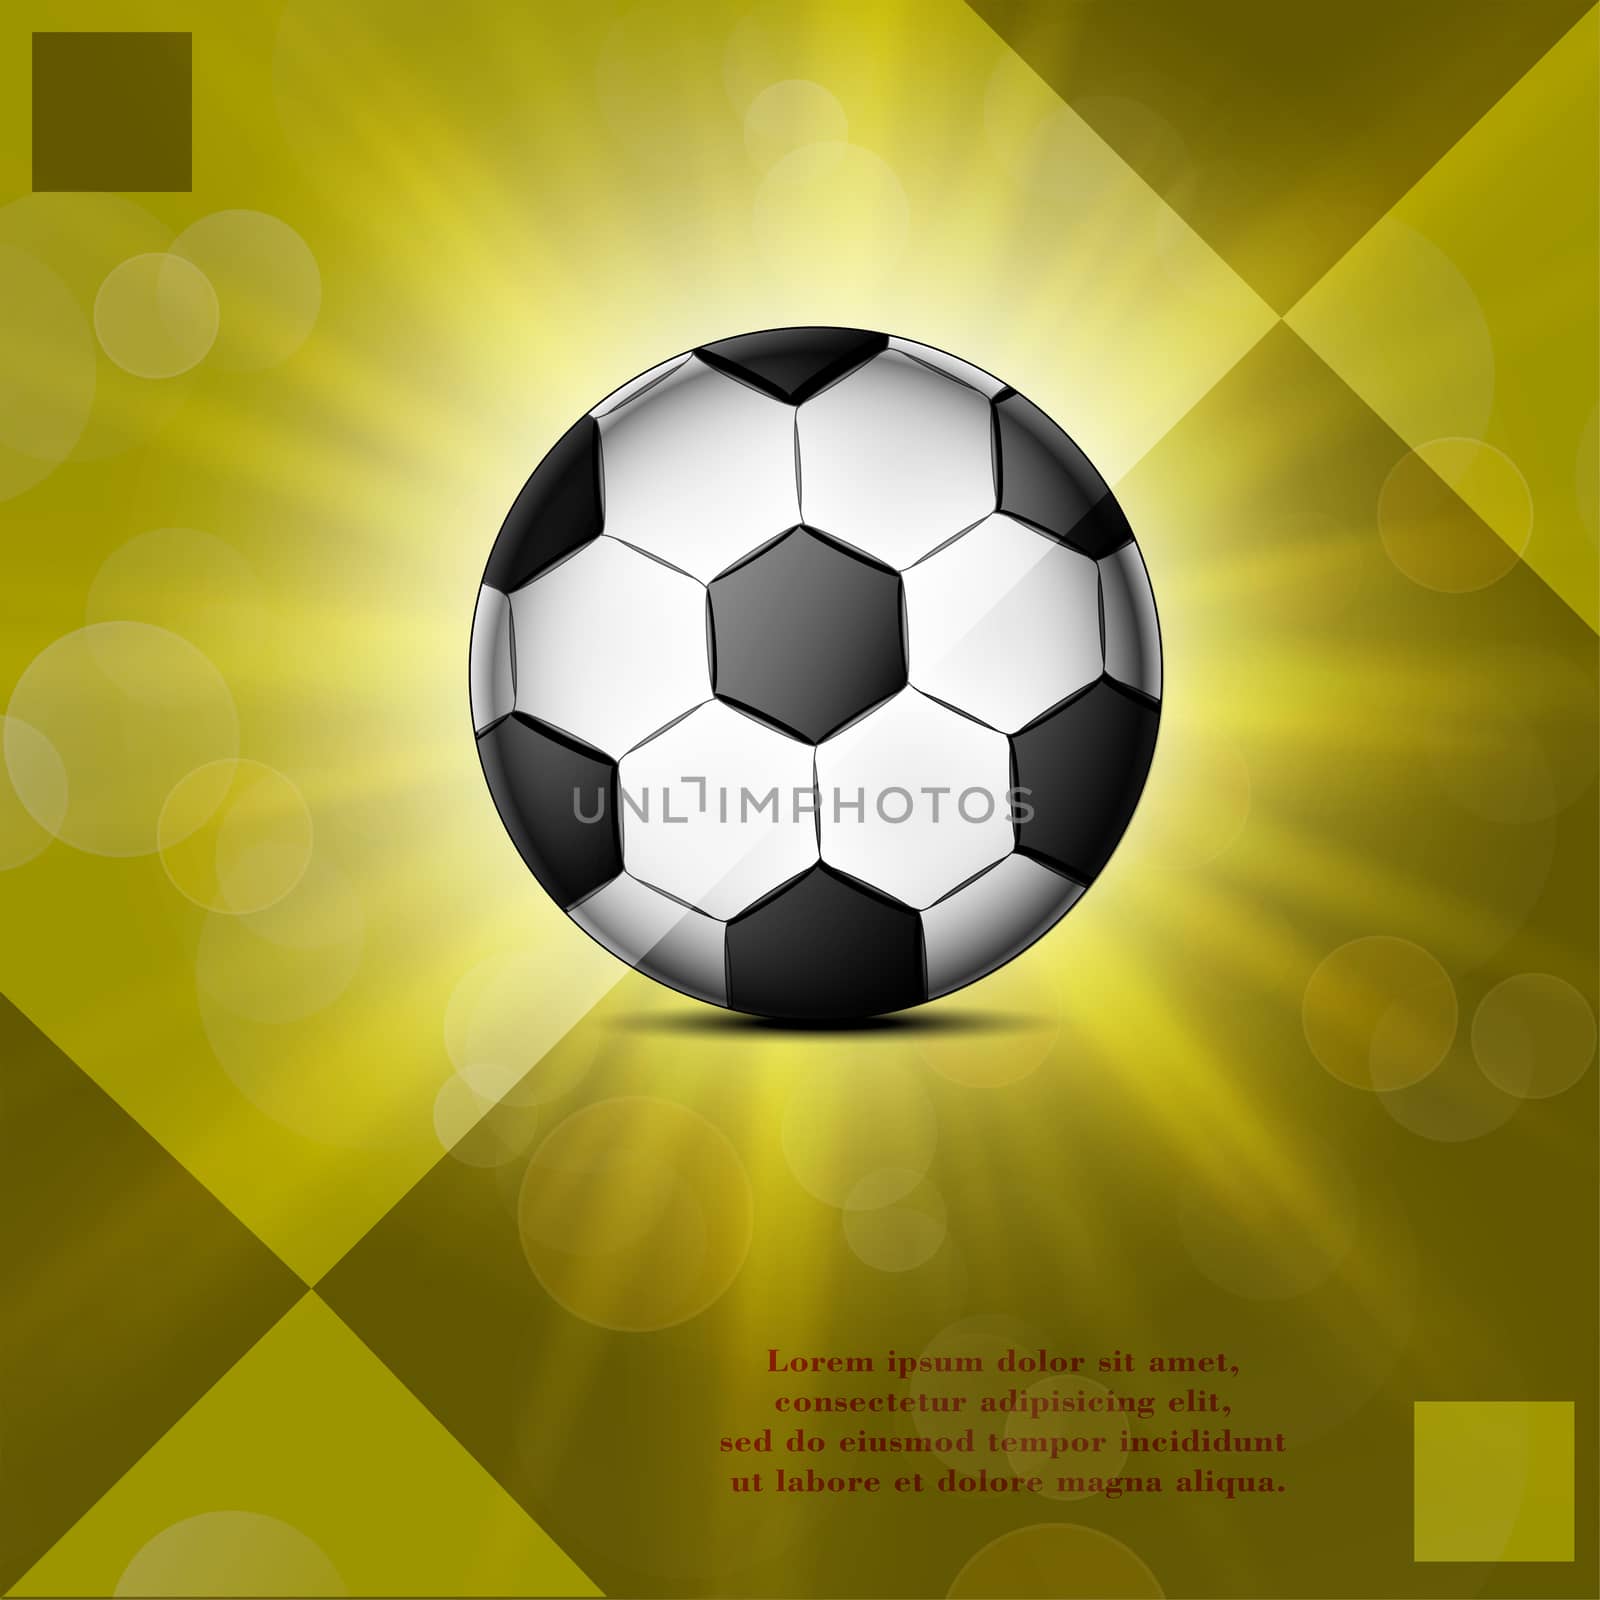 Soccer ball icon on a flat geometric abstract background   illustration. 